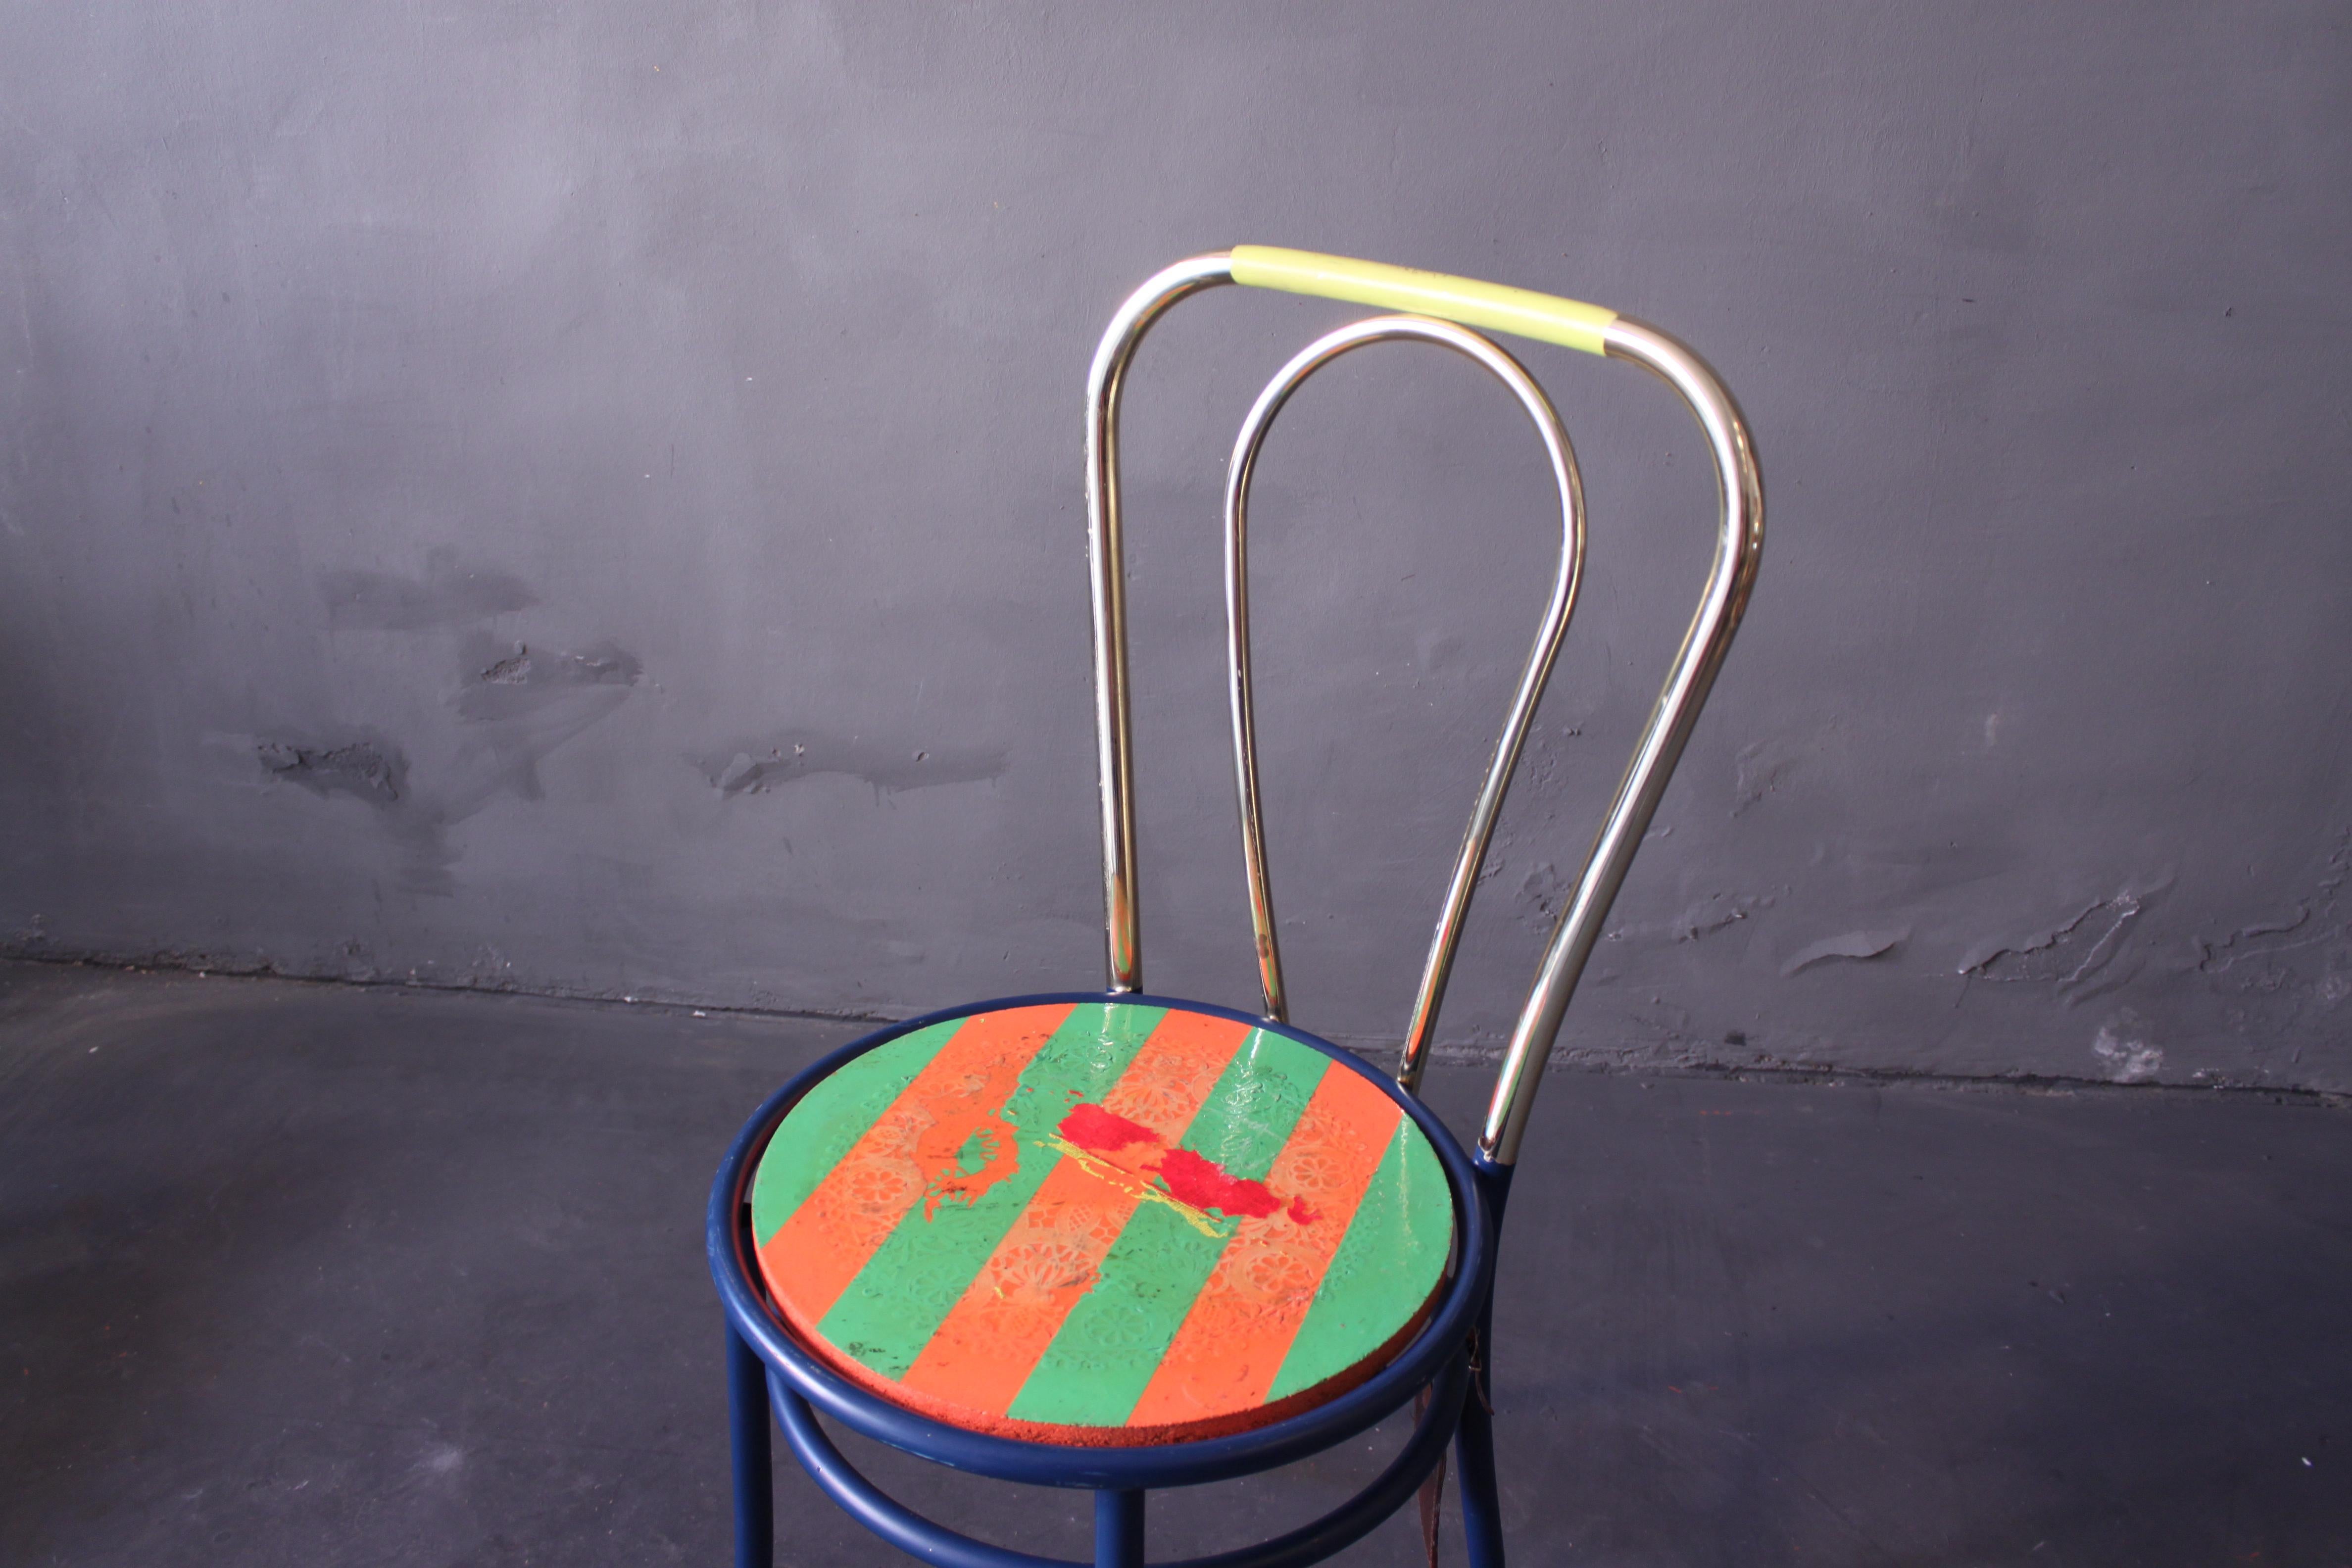 1980's remake of a classic Thonet chair, steel, chromed, seat artisticly painted in the manner of minimalism.
Through my work I transform each chair into a unique and individual object. Chairs that once were mass-produced and homogenous, become